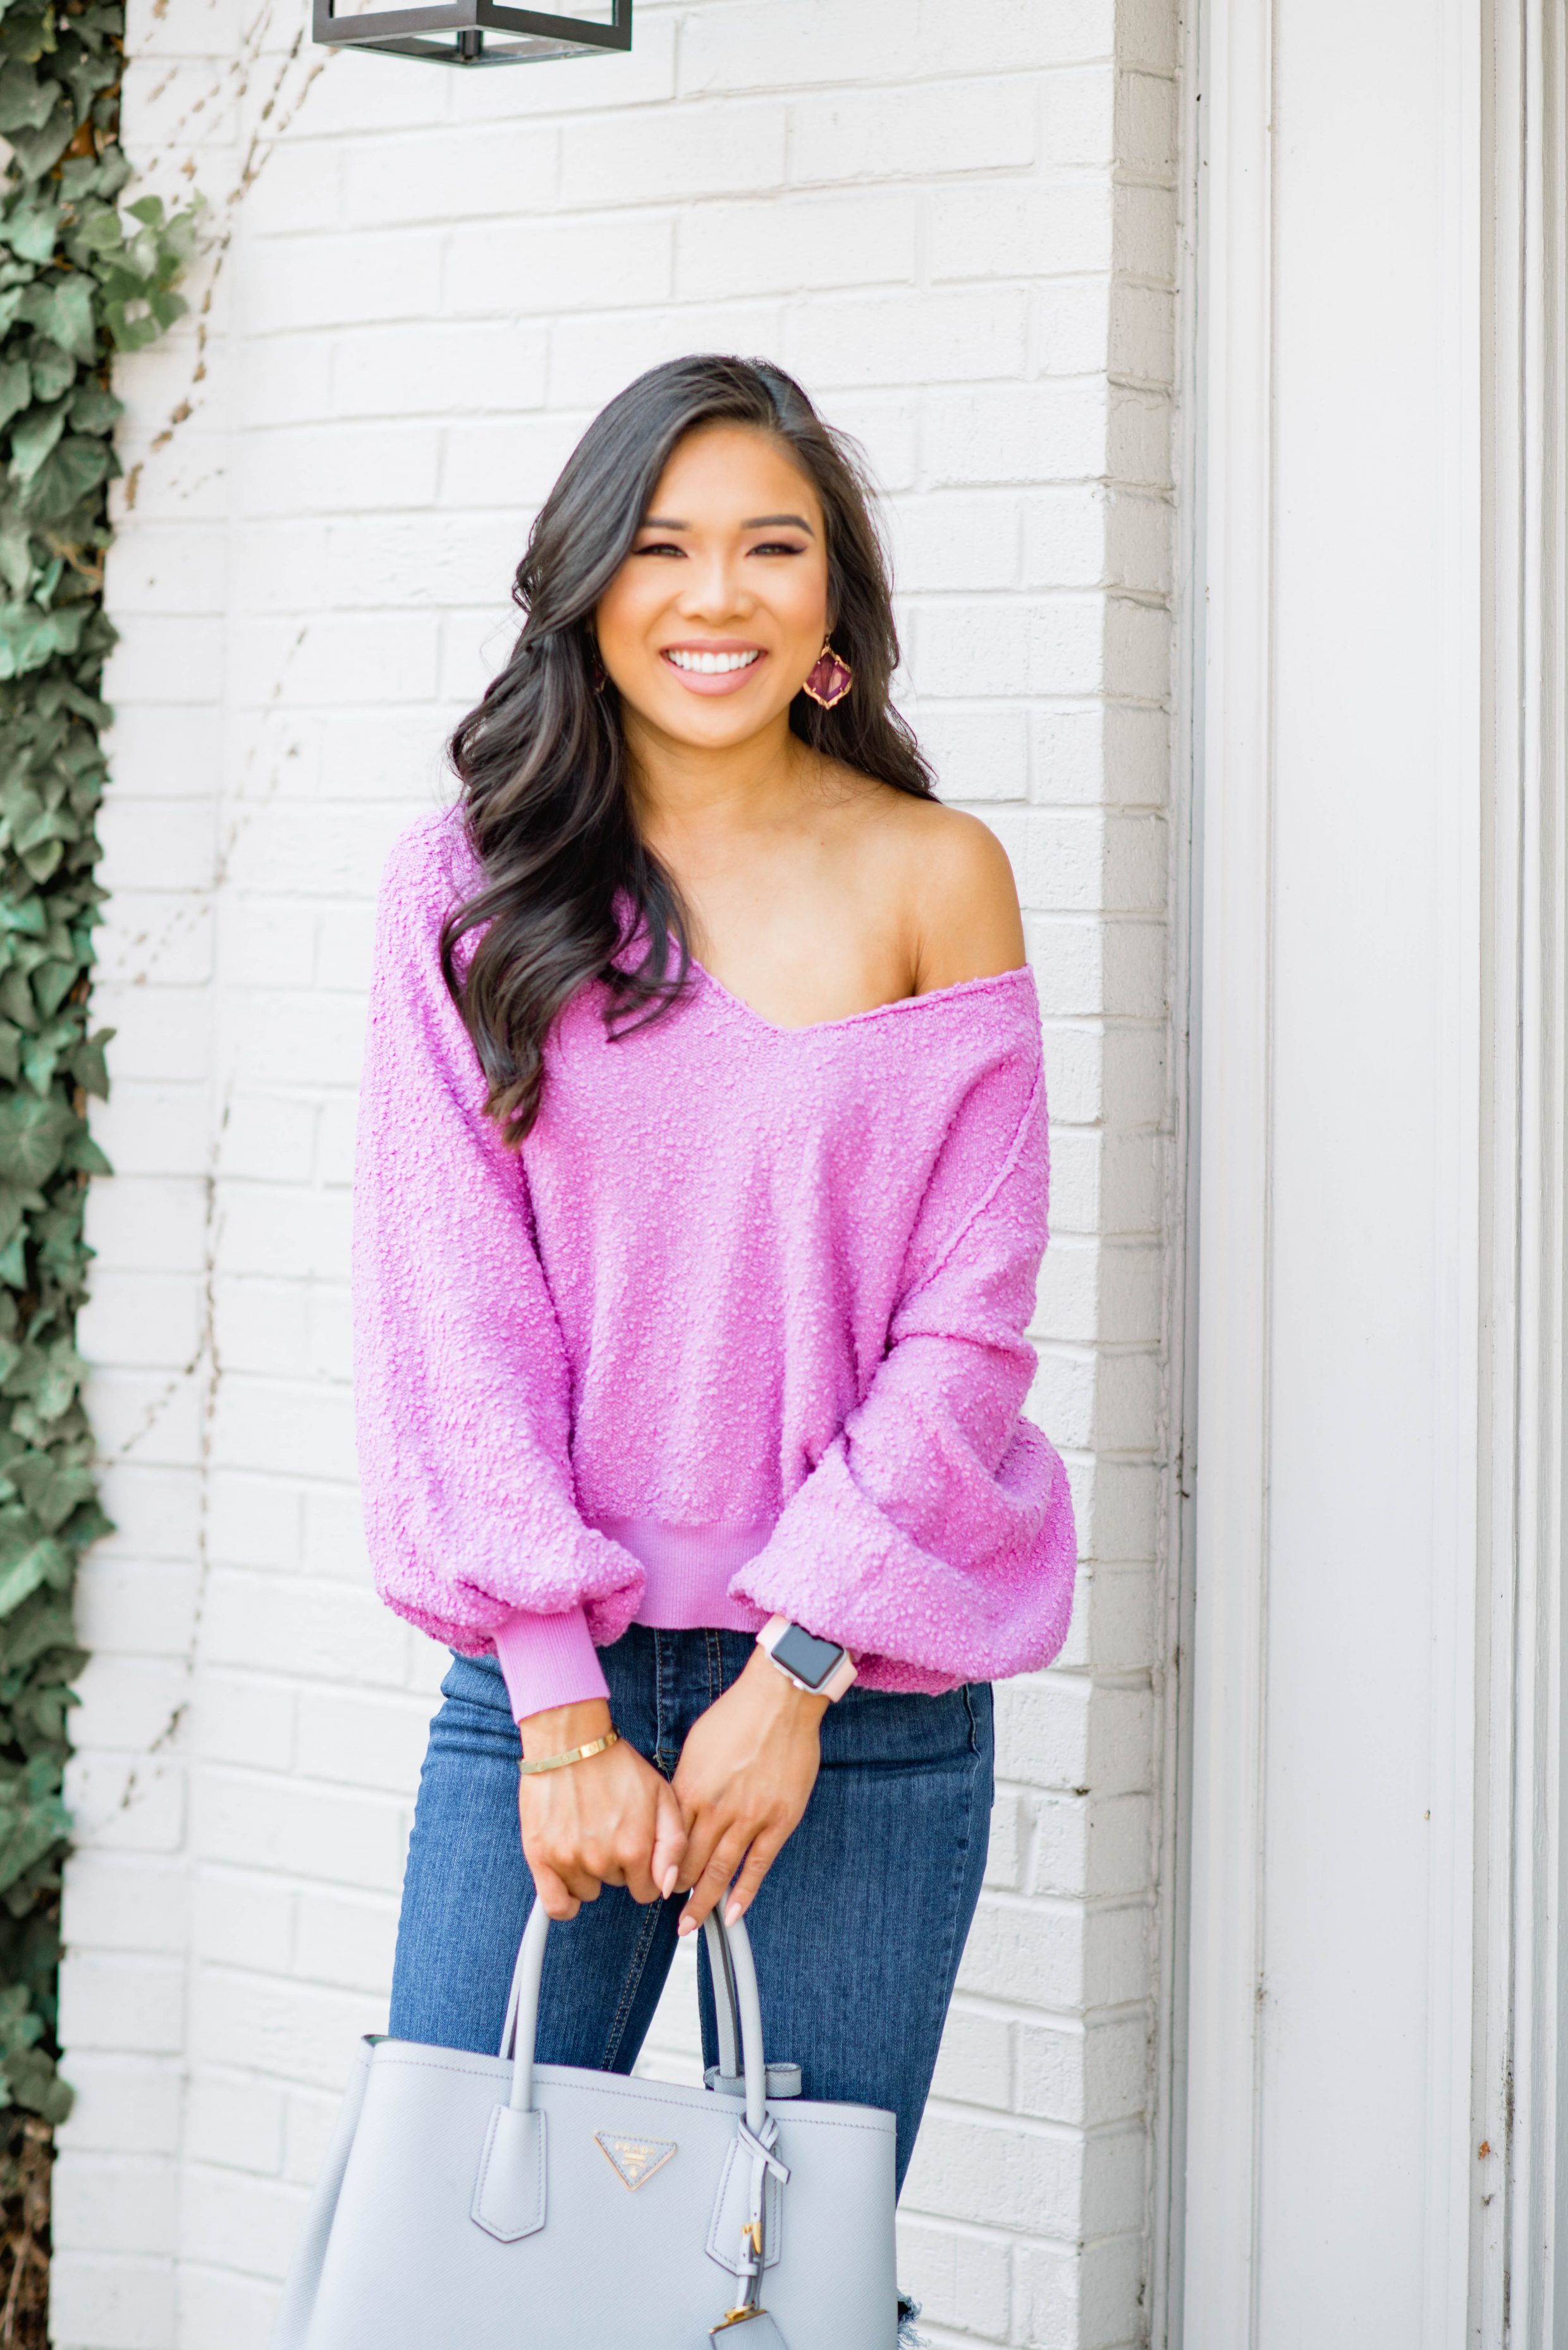 Hoang-Kim wears an easy fall outfit idea with a free people slouchy balloon sleeve sweater and Kendra Scott earrings